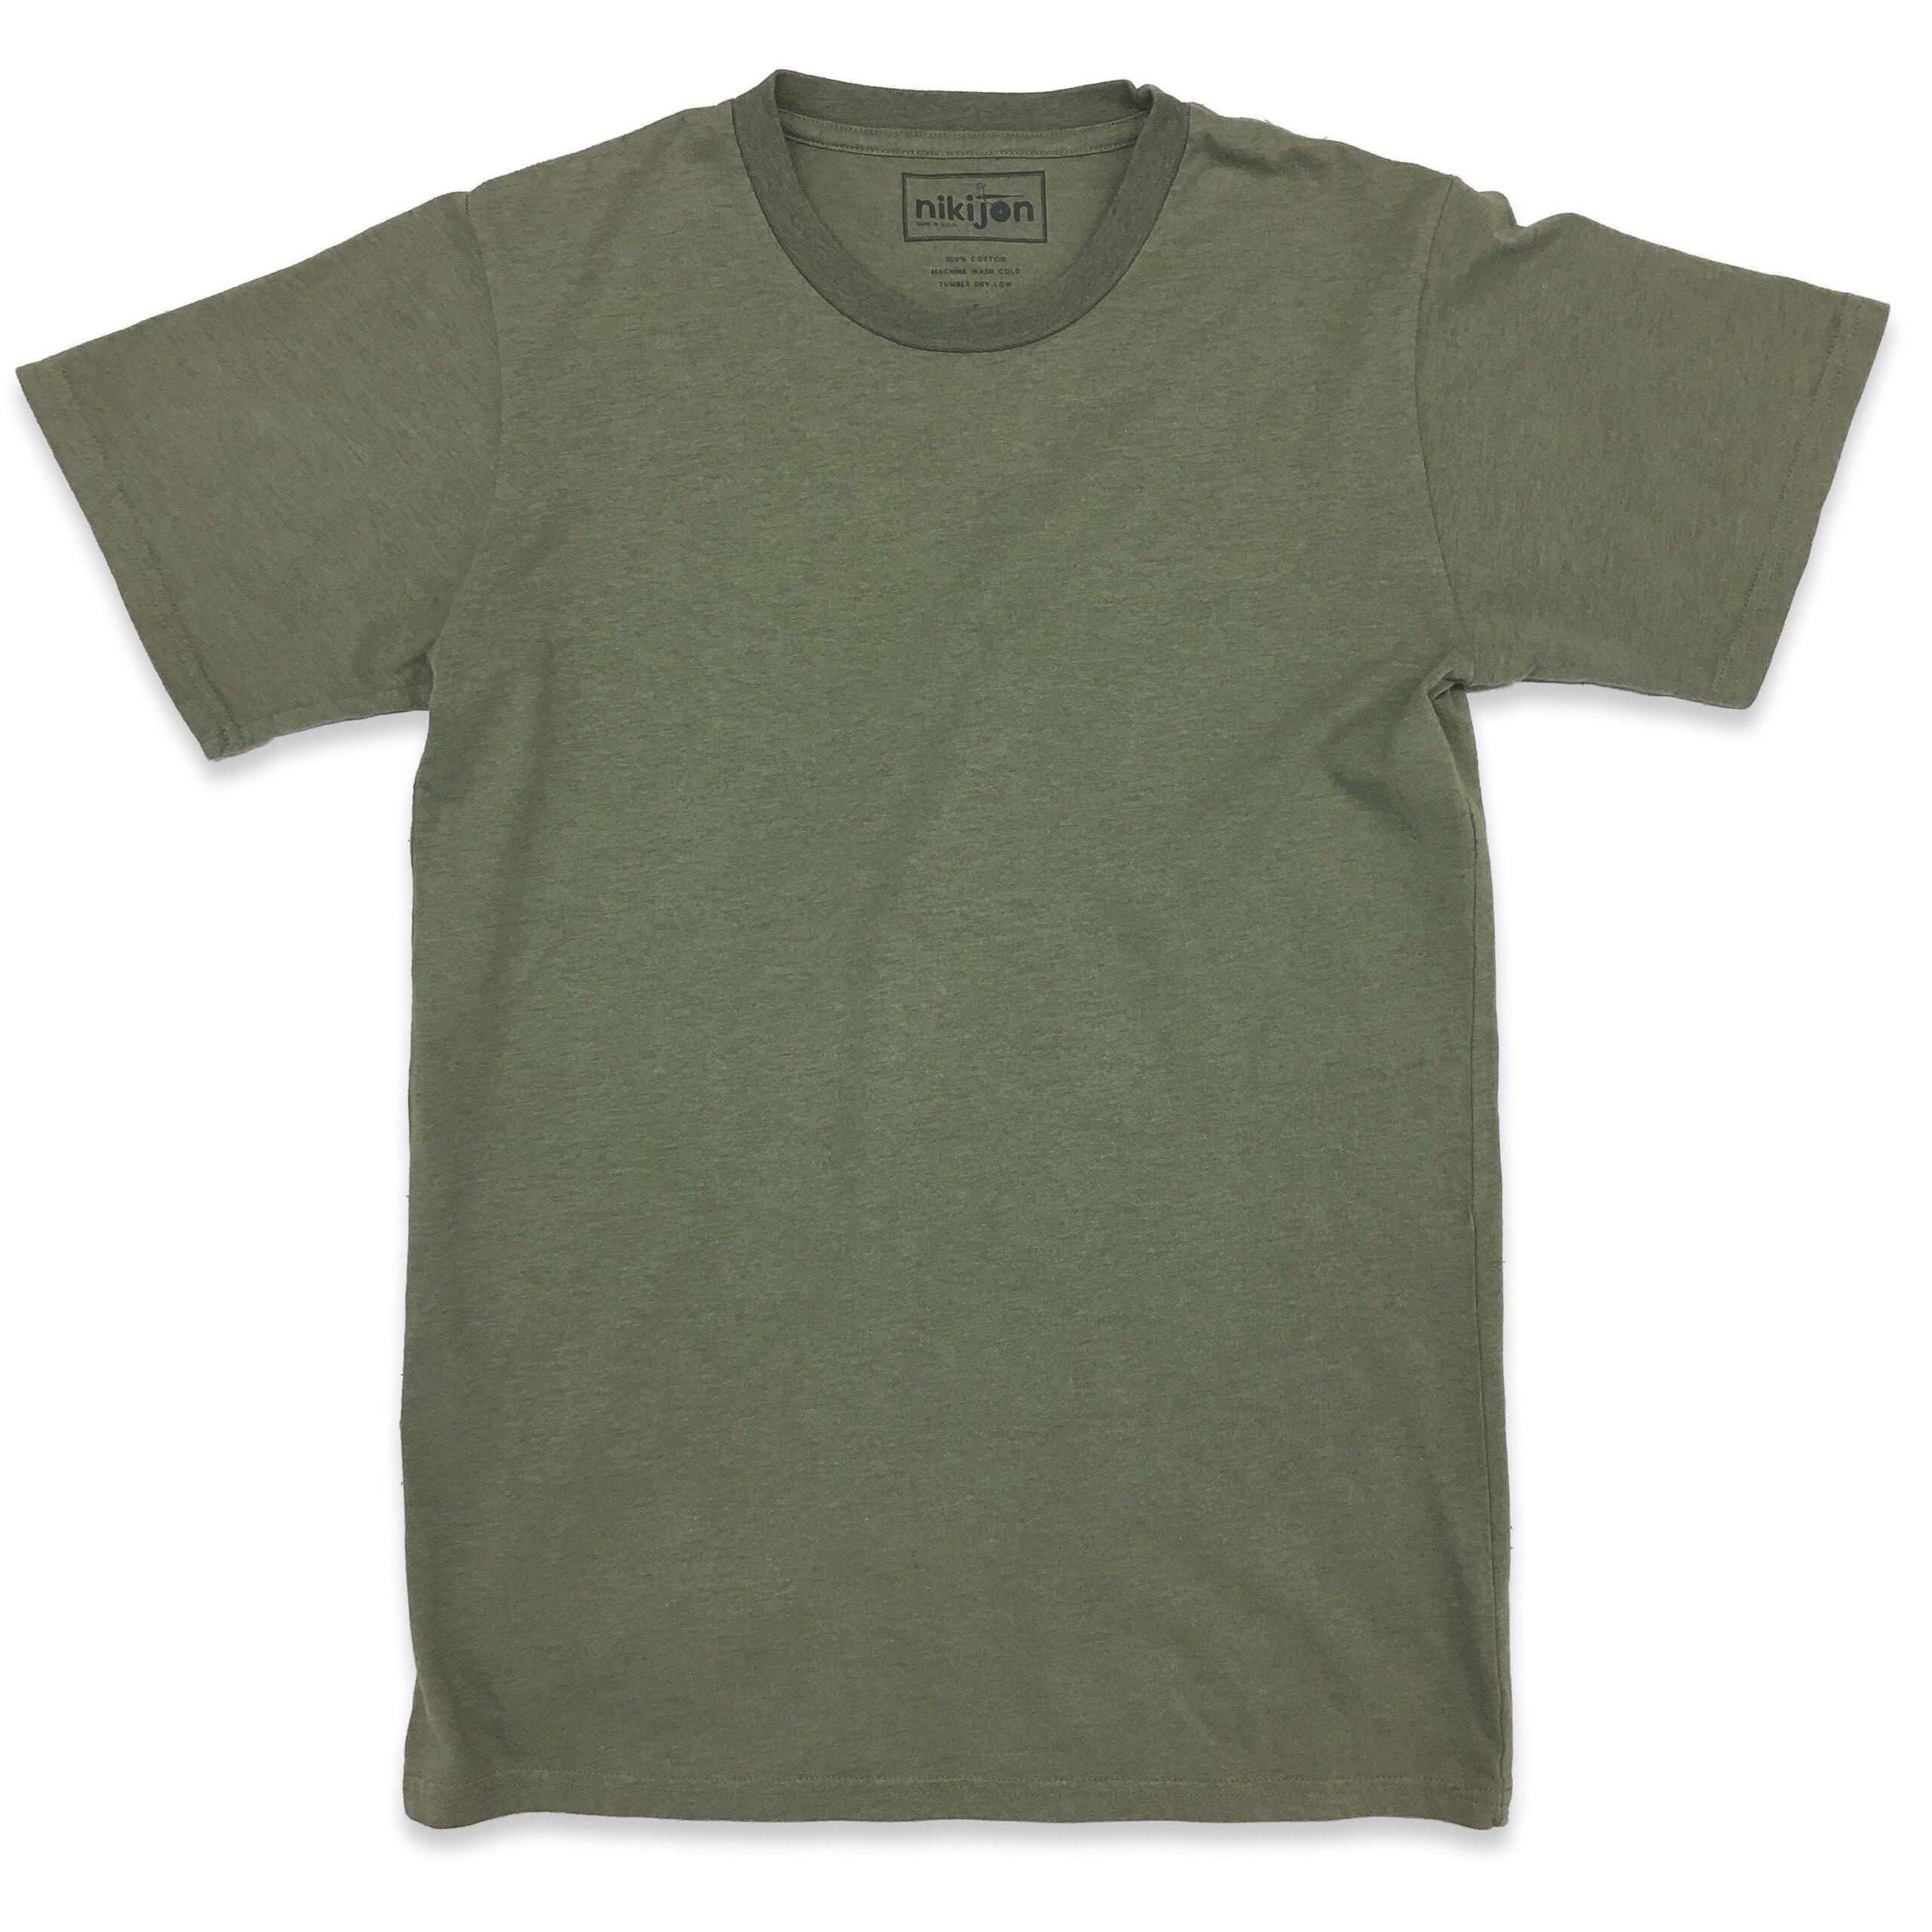 Green Shirts: Embracing Nature’s Color in
Your Wardrobe